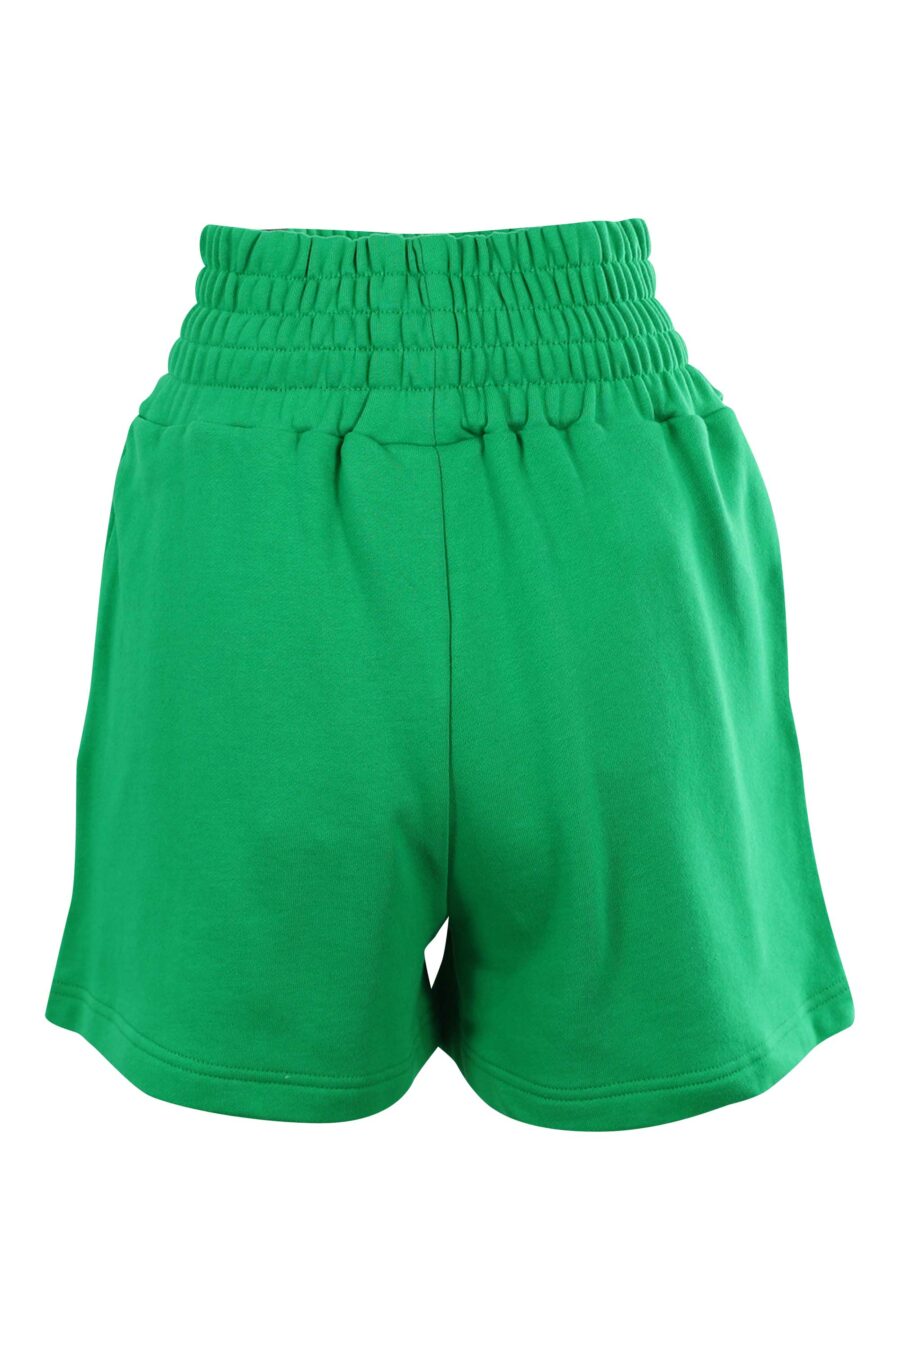 Tracksuit bottoms green shorts with eye and star logo - 8052672415479 2